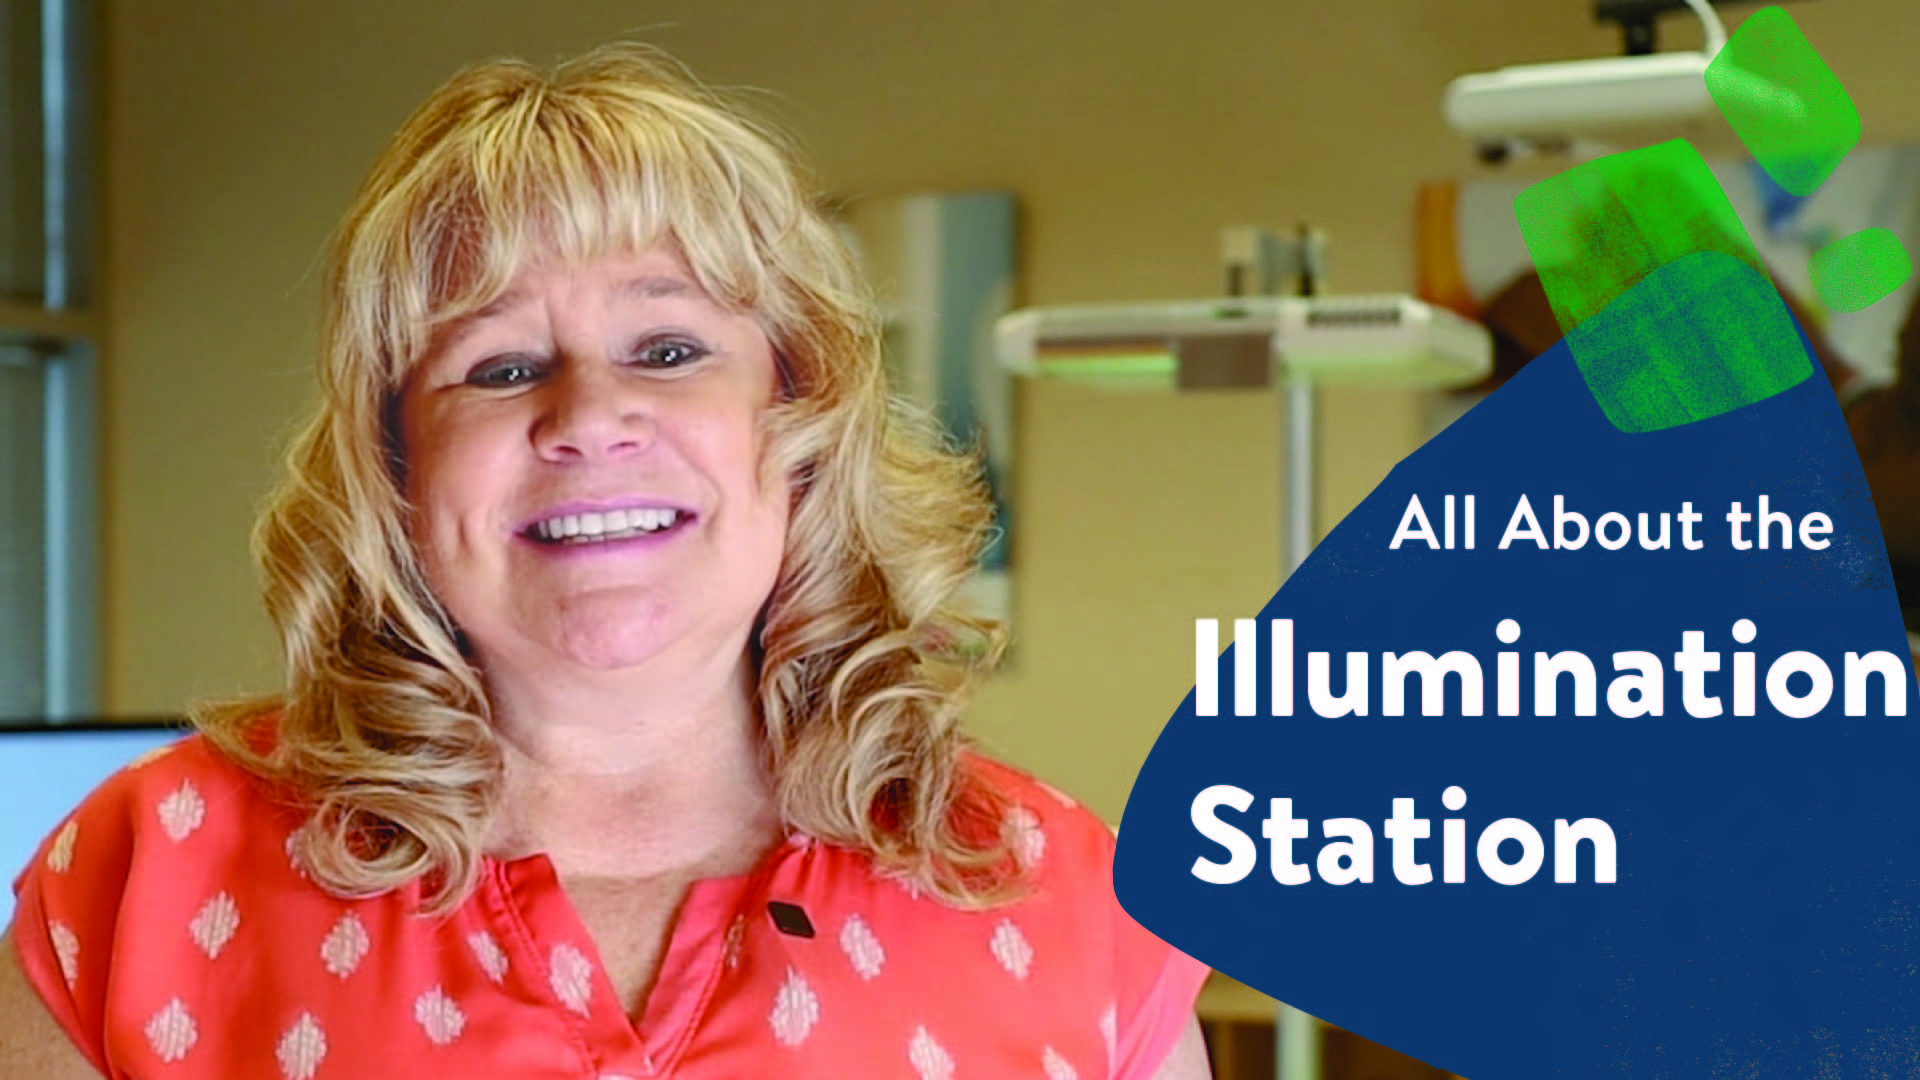 All About the Illumination Station